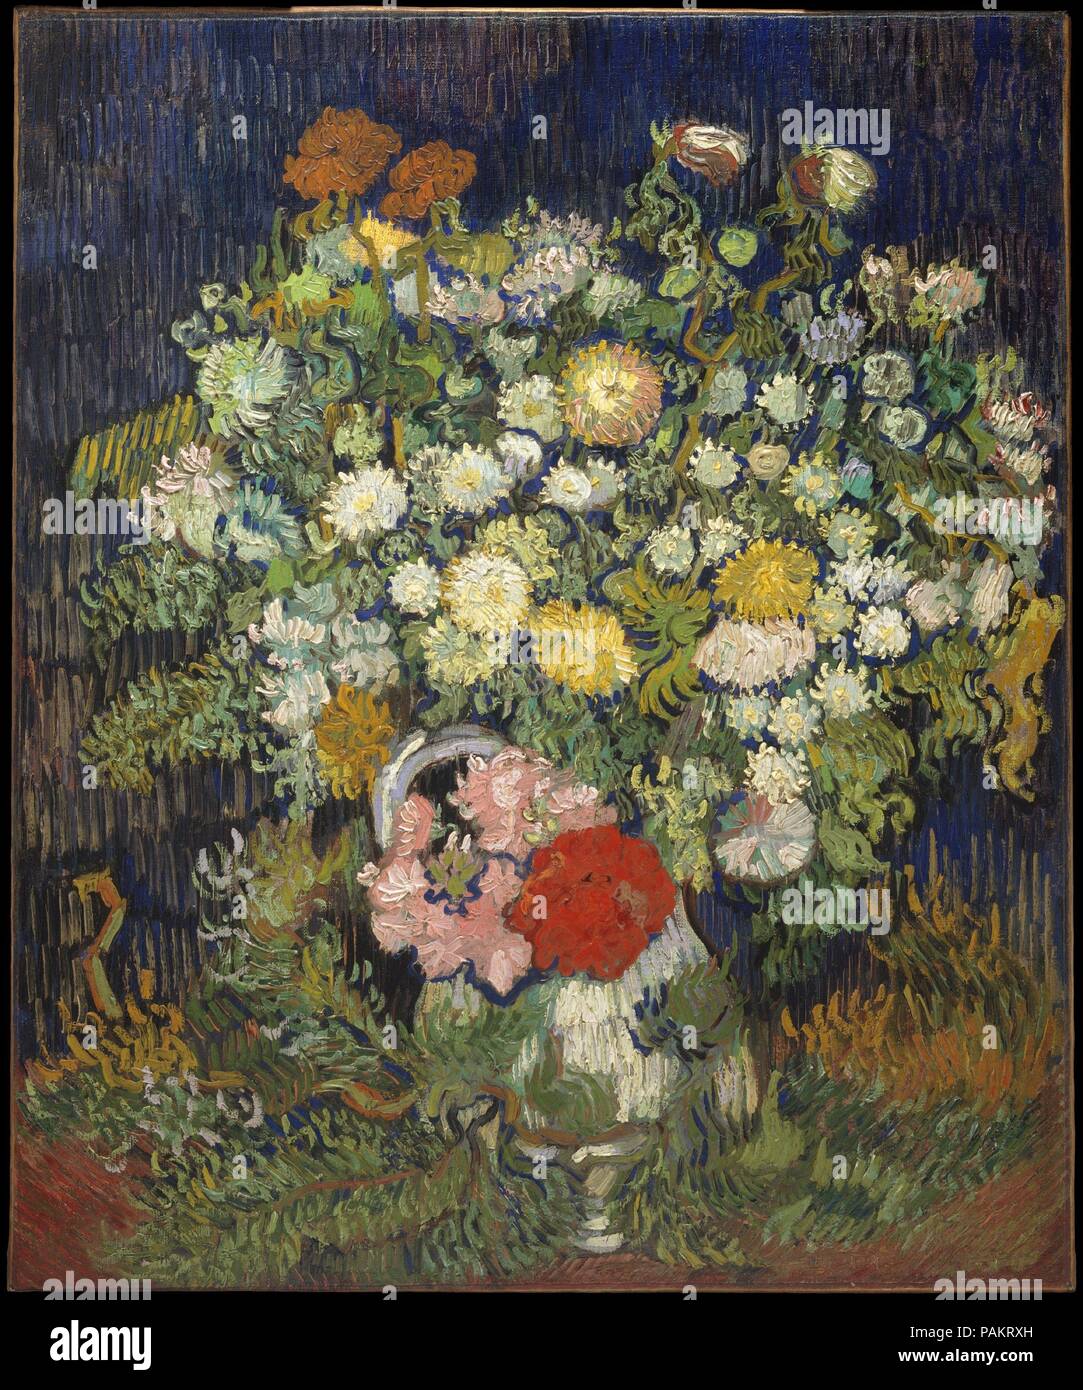 Bouquet of Flowers in a Vase. Artist: Vincent van Gogh (Dutch, Zundert 1853-1890 Auvers-sur-Oise). Dimensions: 25 5/8 x 21 1/4 in. (65.1 x 54 cm). Date: 1890.  This still life is not mentioned in Van Gogh's letters and has puzzled scholars as to its place in his artistic production. The subject enjoys a certain rapport with the mixed bouquets of summer flowers he made in Paris; the quasi-abstract floral wallpaper design in the <i>Berceuse</i> of Arles (1996.435), and the white porcelain vase in the <i>Irises</i> of Saint-Rémy (58.187). However, the palette and style of this painting, especiall Stock Photo